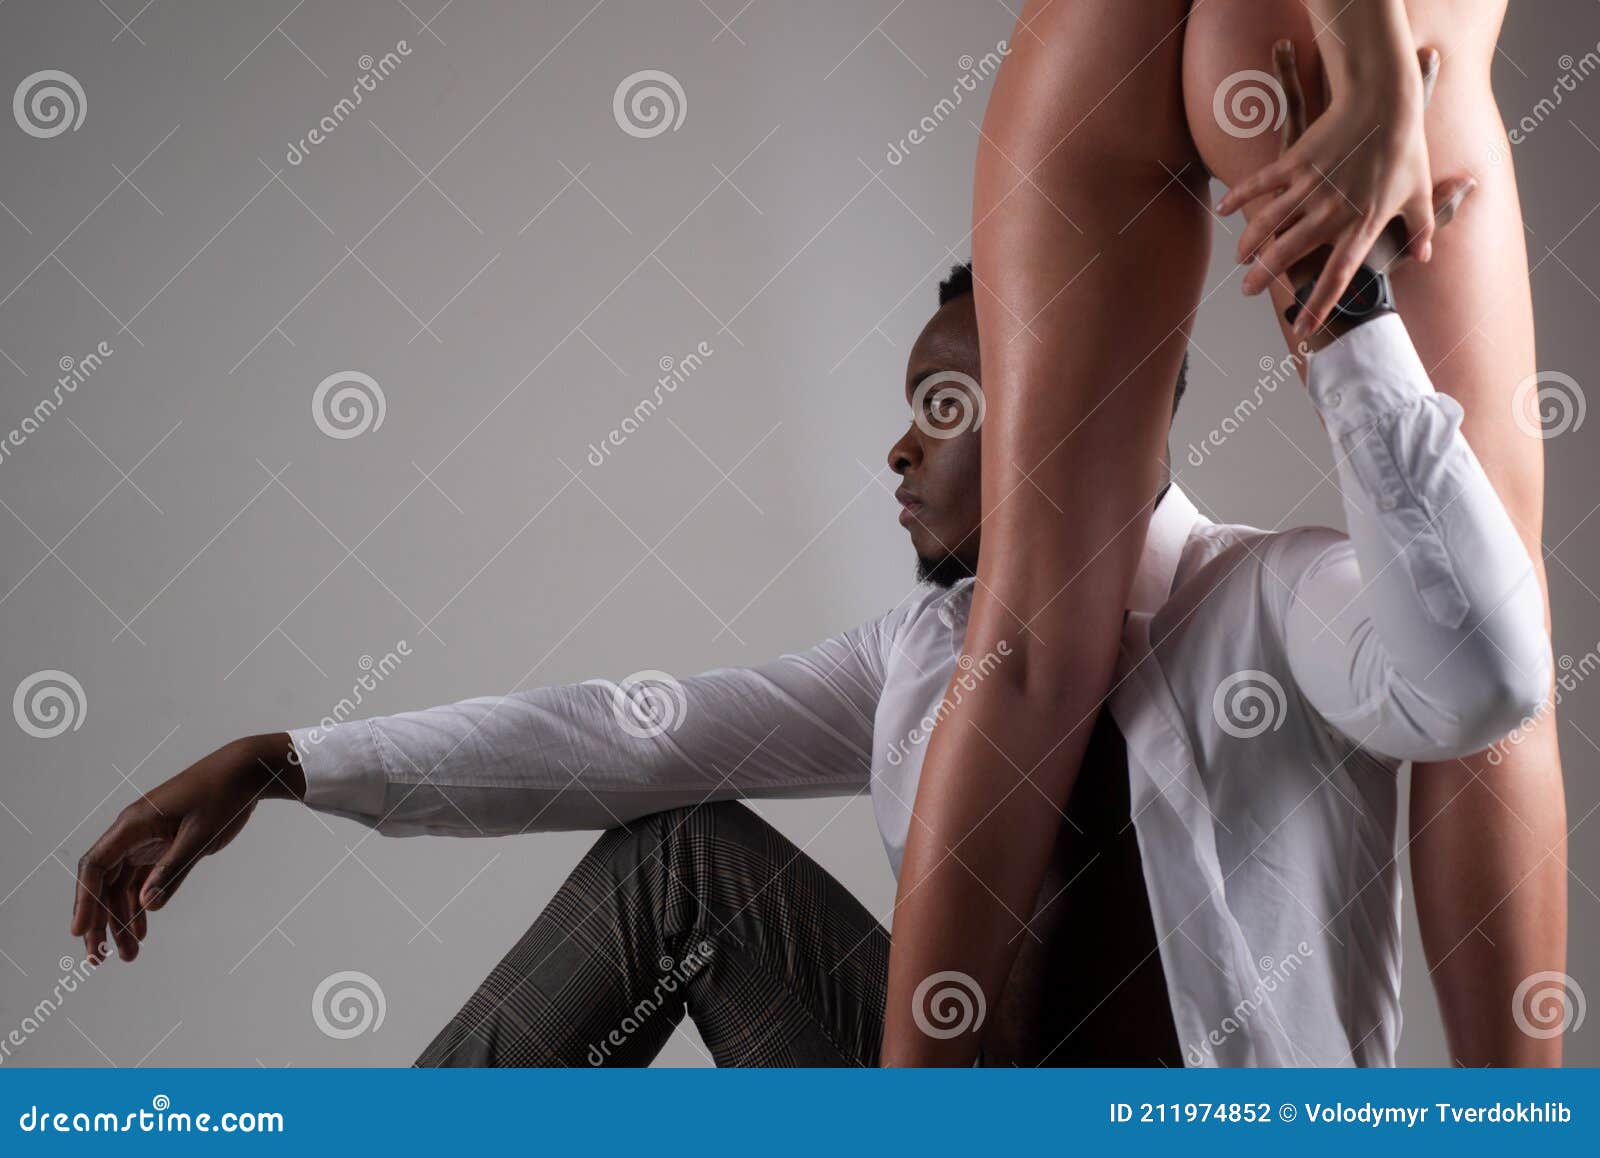 Fun And Sexy Interracial - Couple. Interracial Sex. Passion Ans Love. Erotic and Desire. Woman  Lingerie. Stock Photo - Image of education, desire: 211974852